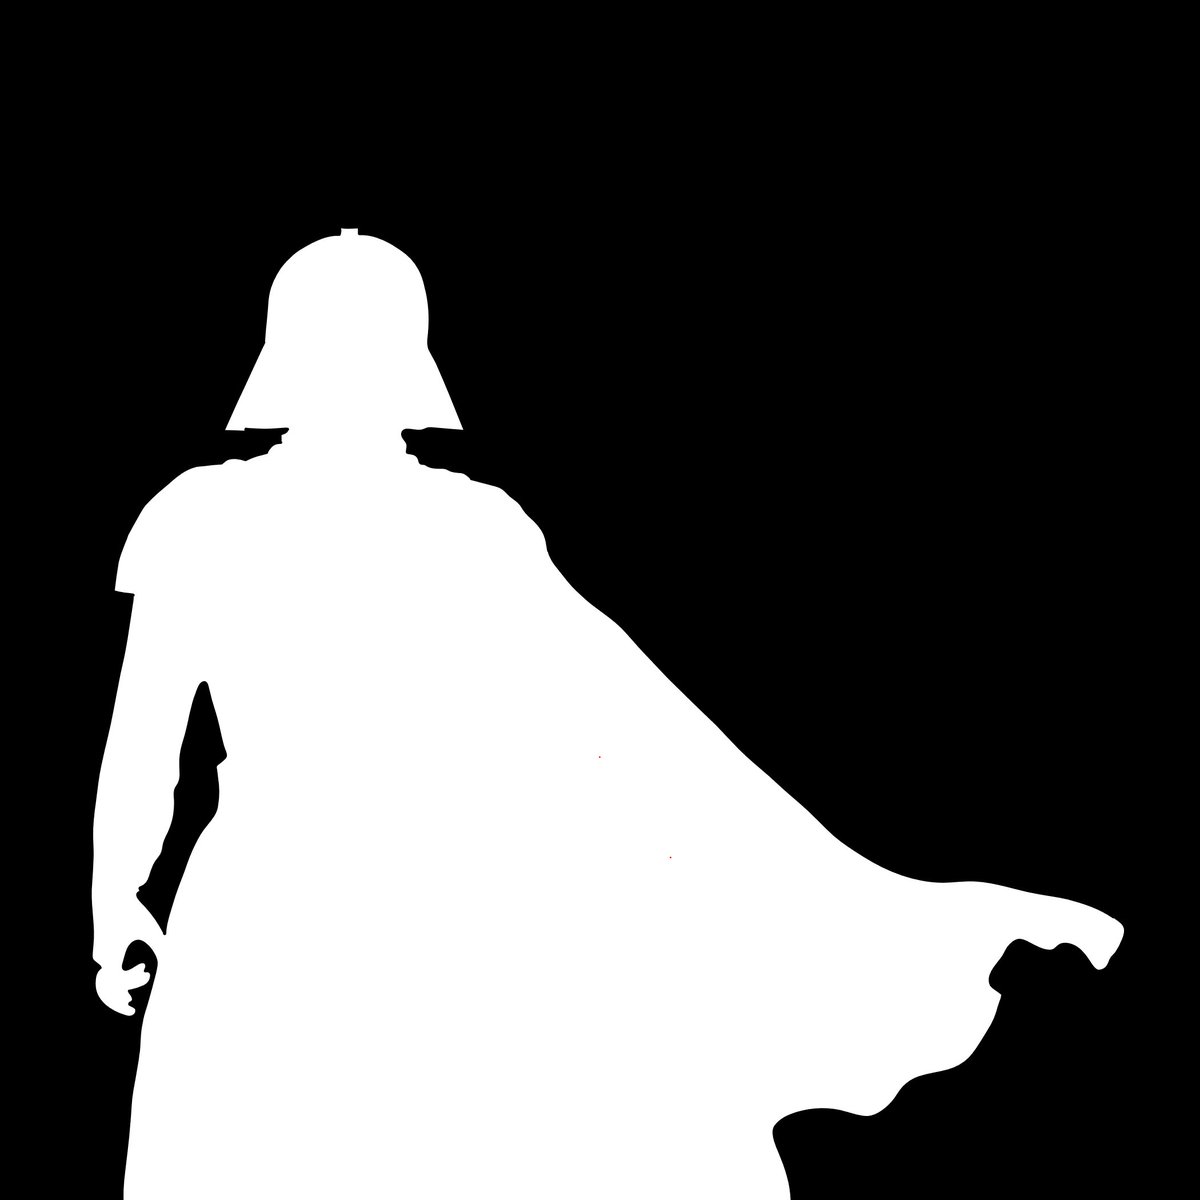 'When I Left You, I Was But The Learner. Now, I Am The Master.' #MayTheFourth #StarWars #DarthVader #DrawnOnSurface